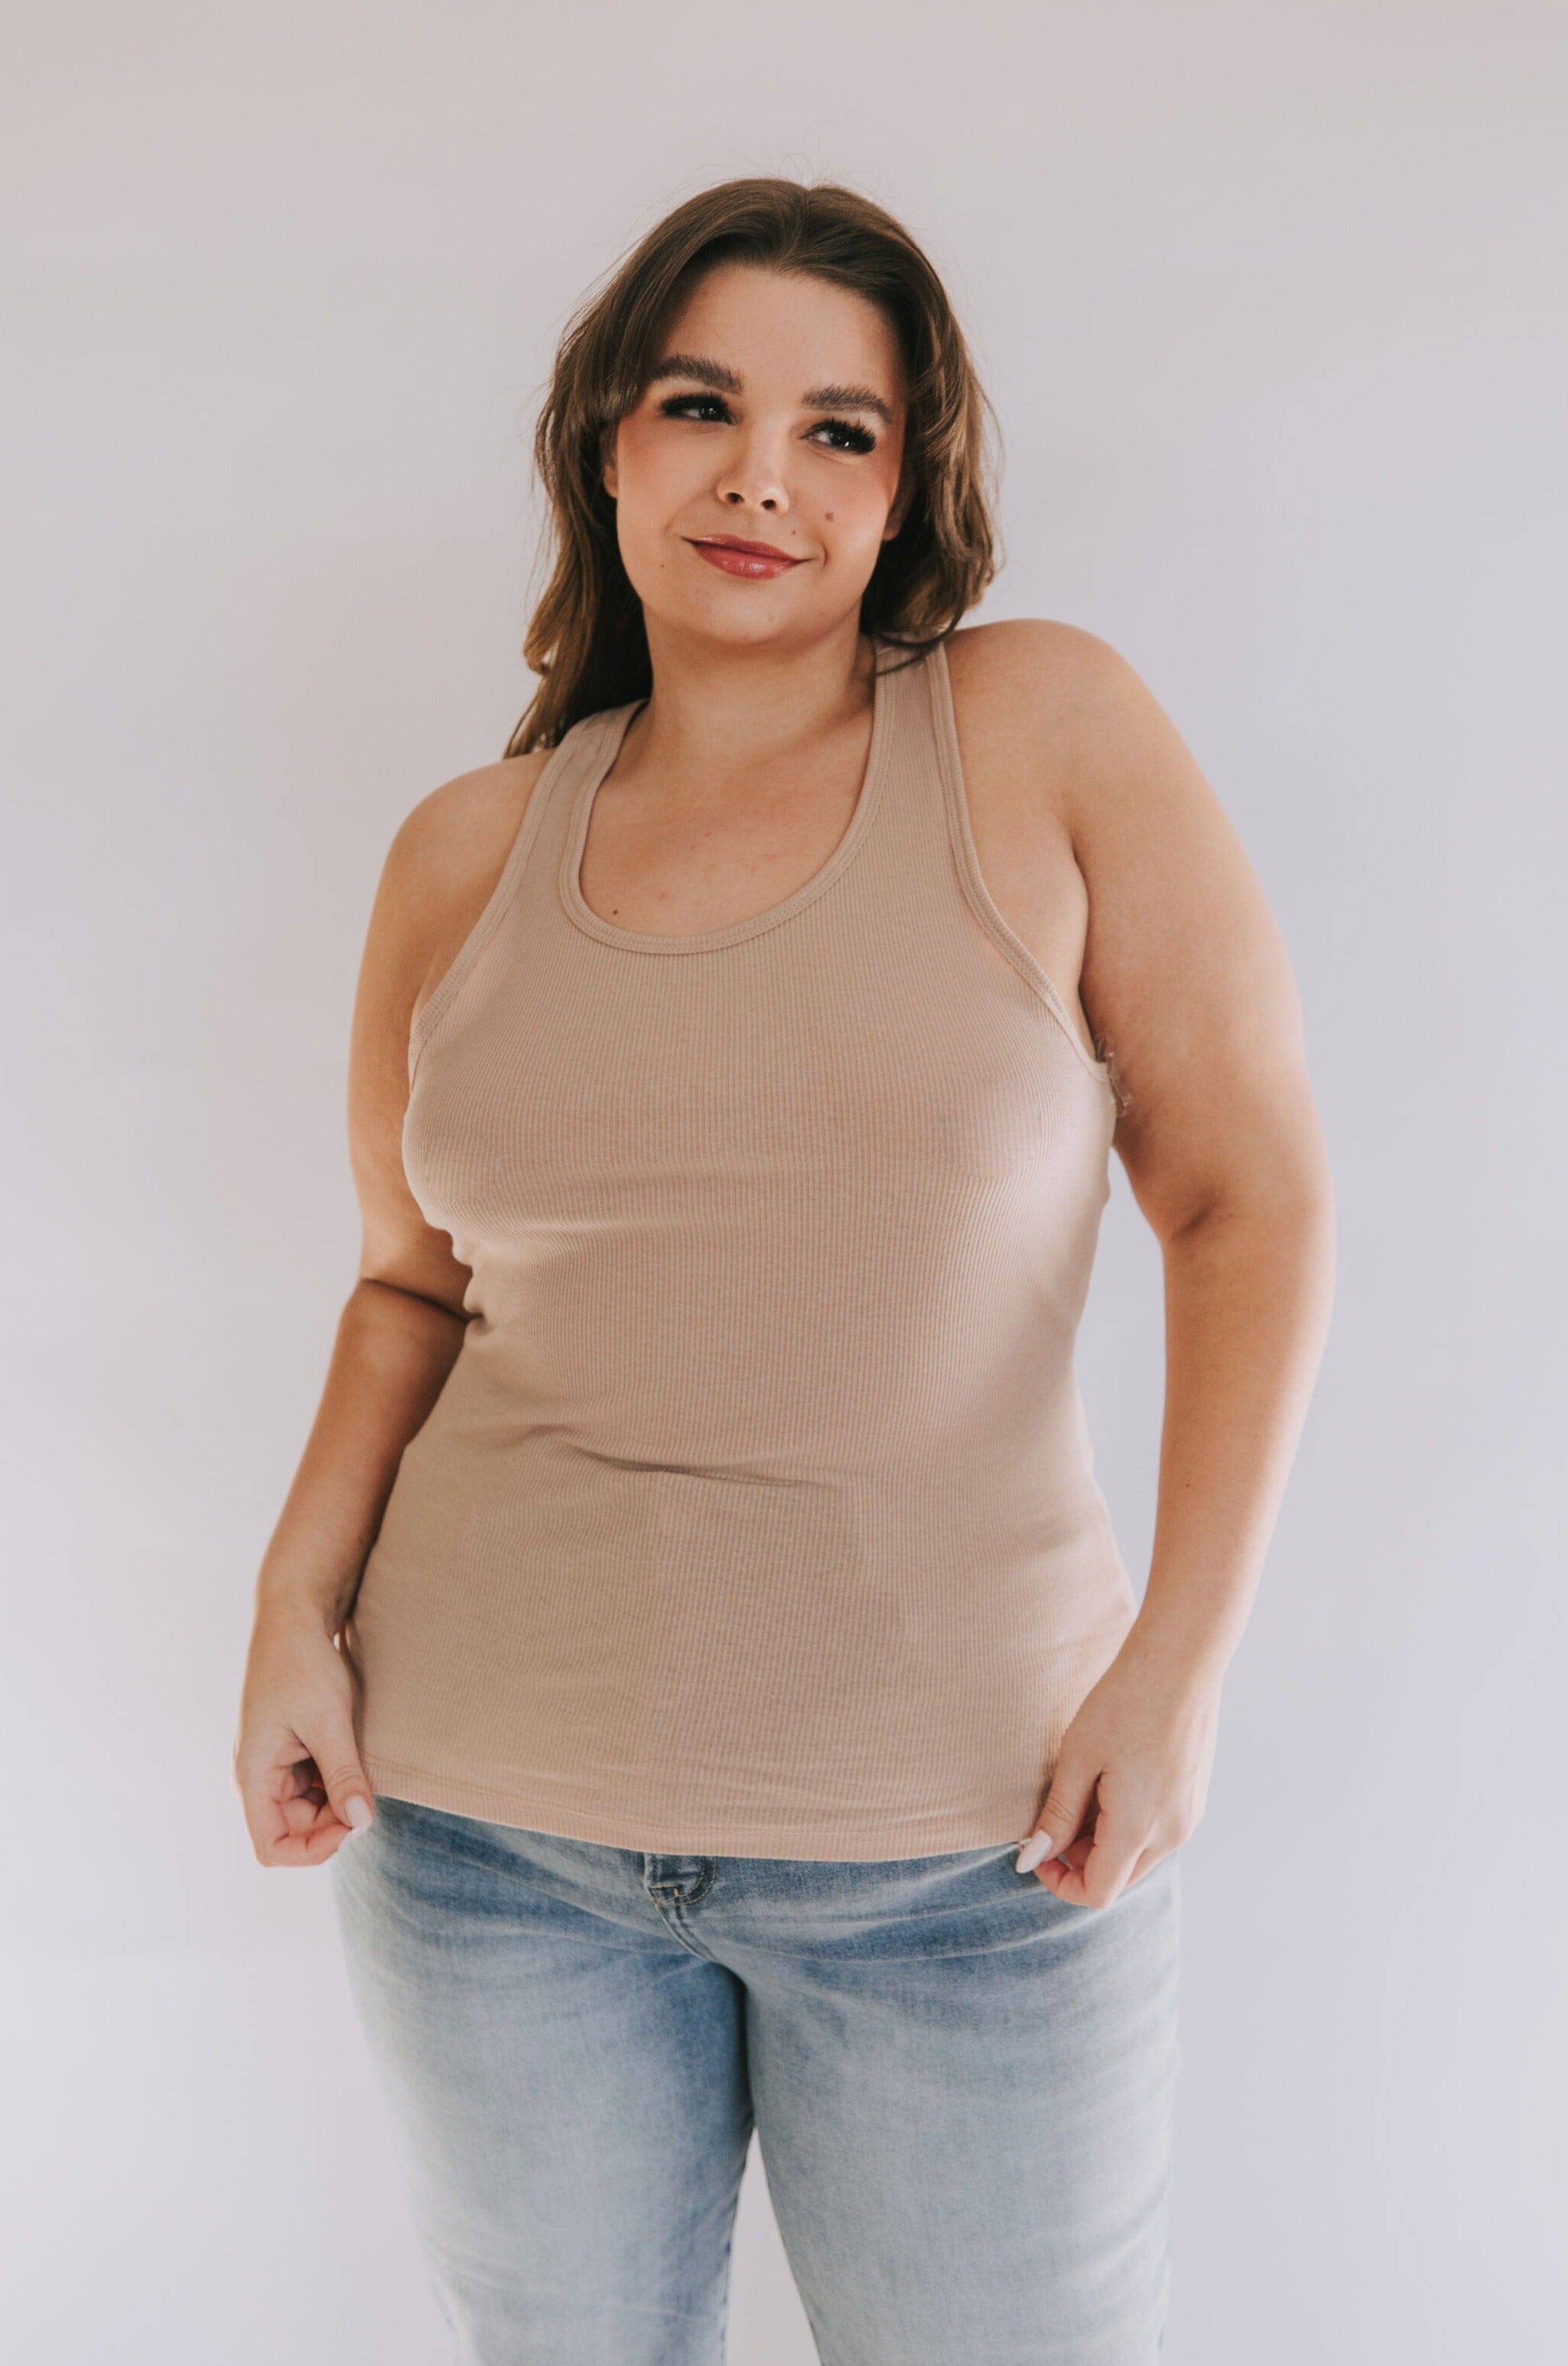 PLUS SIZE - Backing Down Tank Top - 3 Colors!